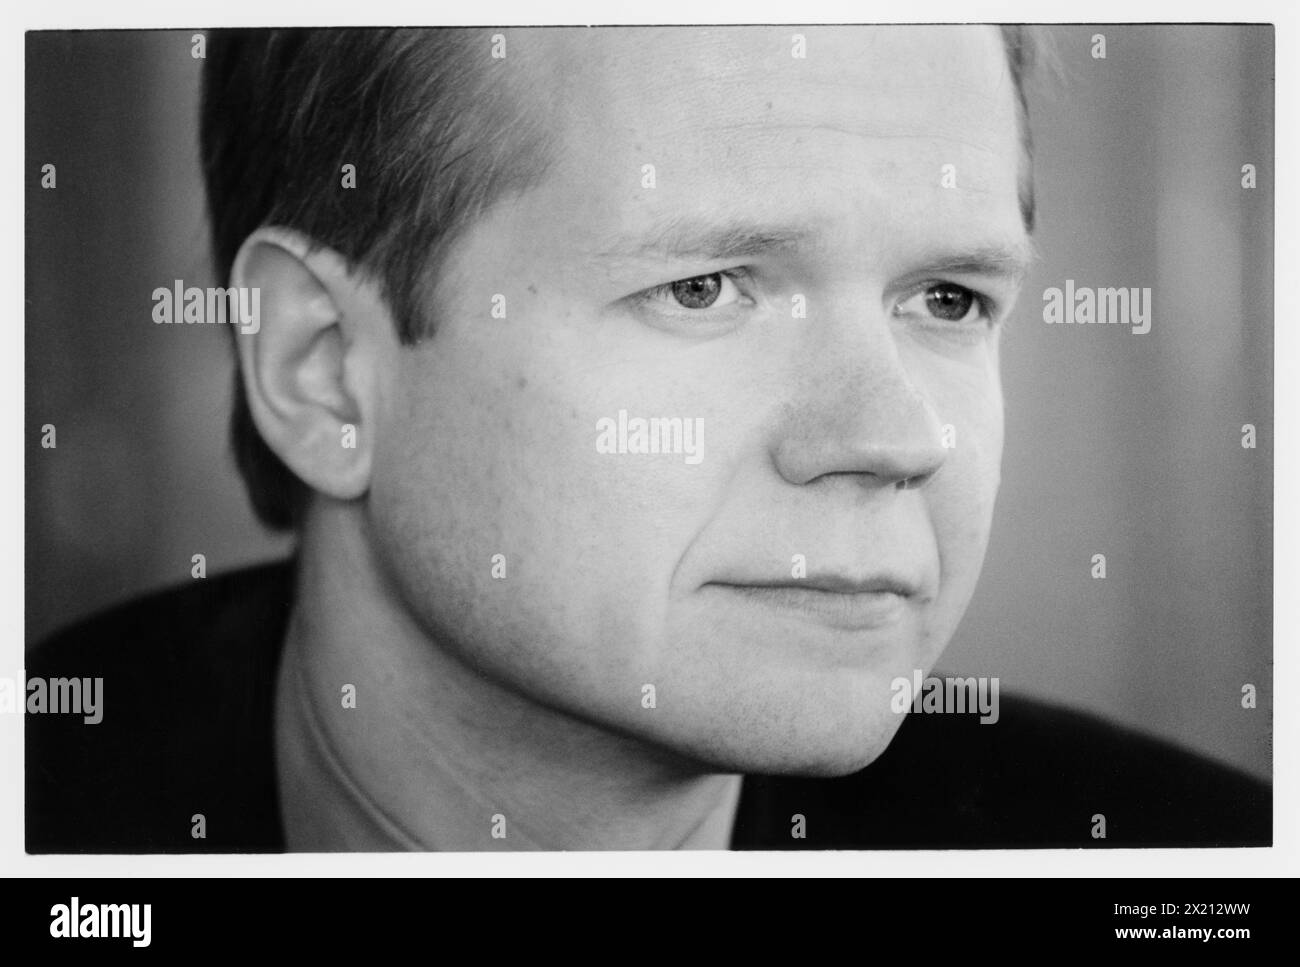 WILLIAM HAGUE, PORTRAIT, 1997: Welsh Minster – later Shadow Conservative Leader – William Hague during the General Election 1997 campaign in Cardiff Bay, Wales, UK on 10 April 1997. He was elected Tory leader in June 1997 at 36 after the election defeat. Photo: Rob Watkins. INFO: William Hague, a British politician and former leader of the Conservative Party, rose to prominence in the 1990s. He lost the 2001 General Election to Tony Blair but served as Member of Parliament and held various cabinet positions, displaying eloquence and leadership during his tenure in government. Stock Photo